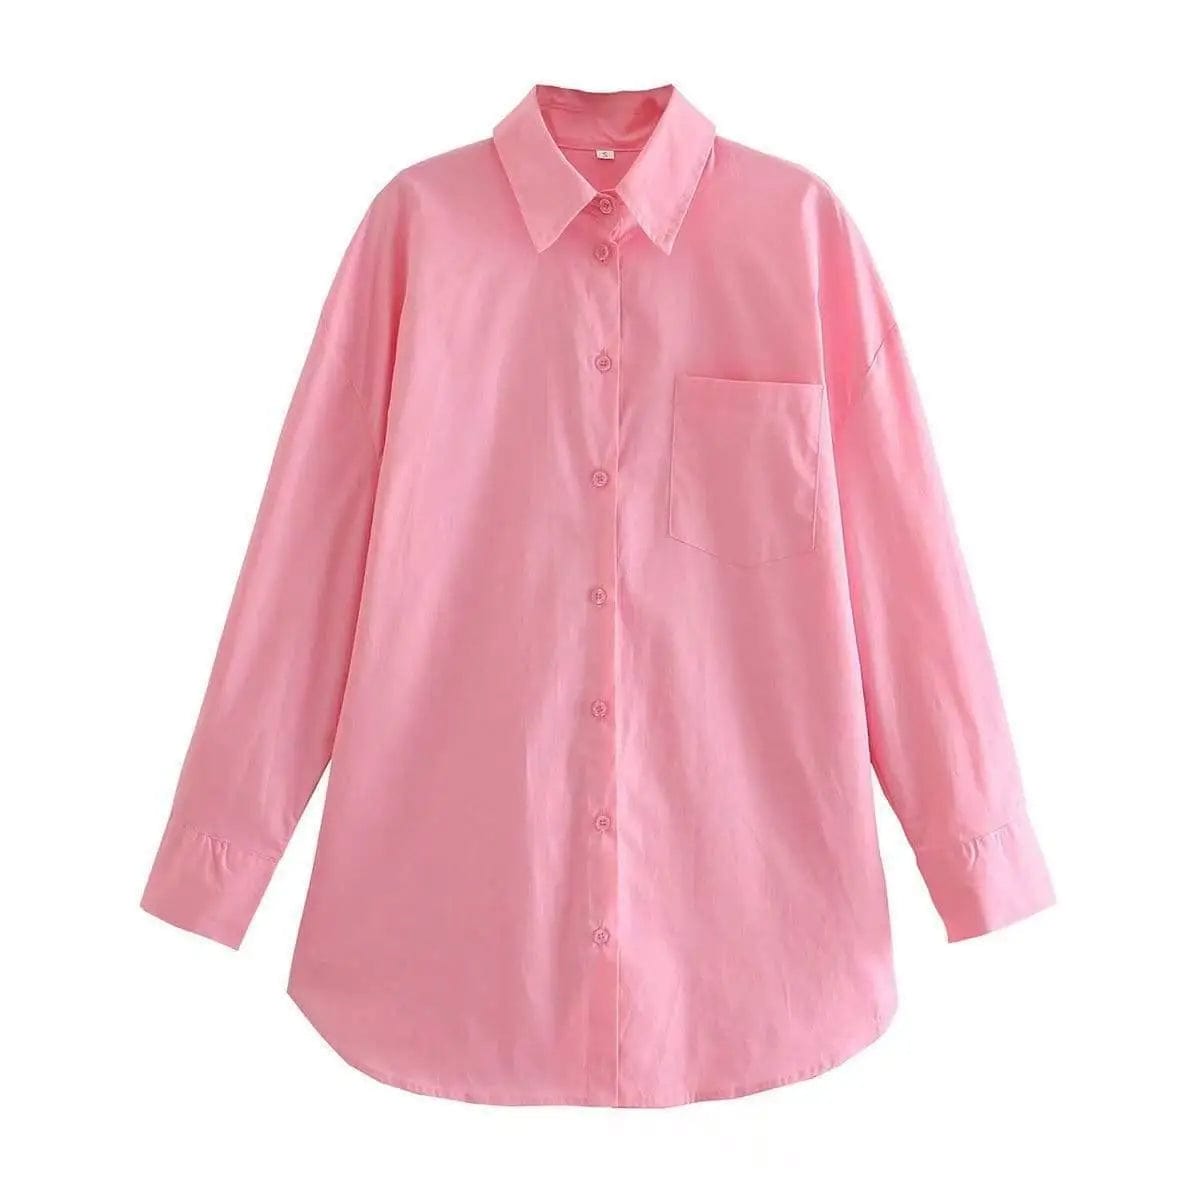 LOVEMI Jackets Pink / S Lovemi -  Solid Color Casual Shirt Girls Top